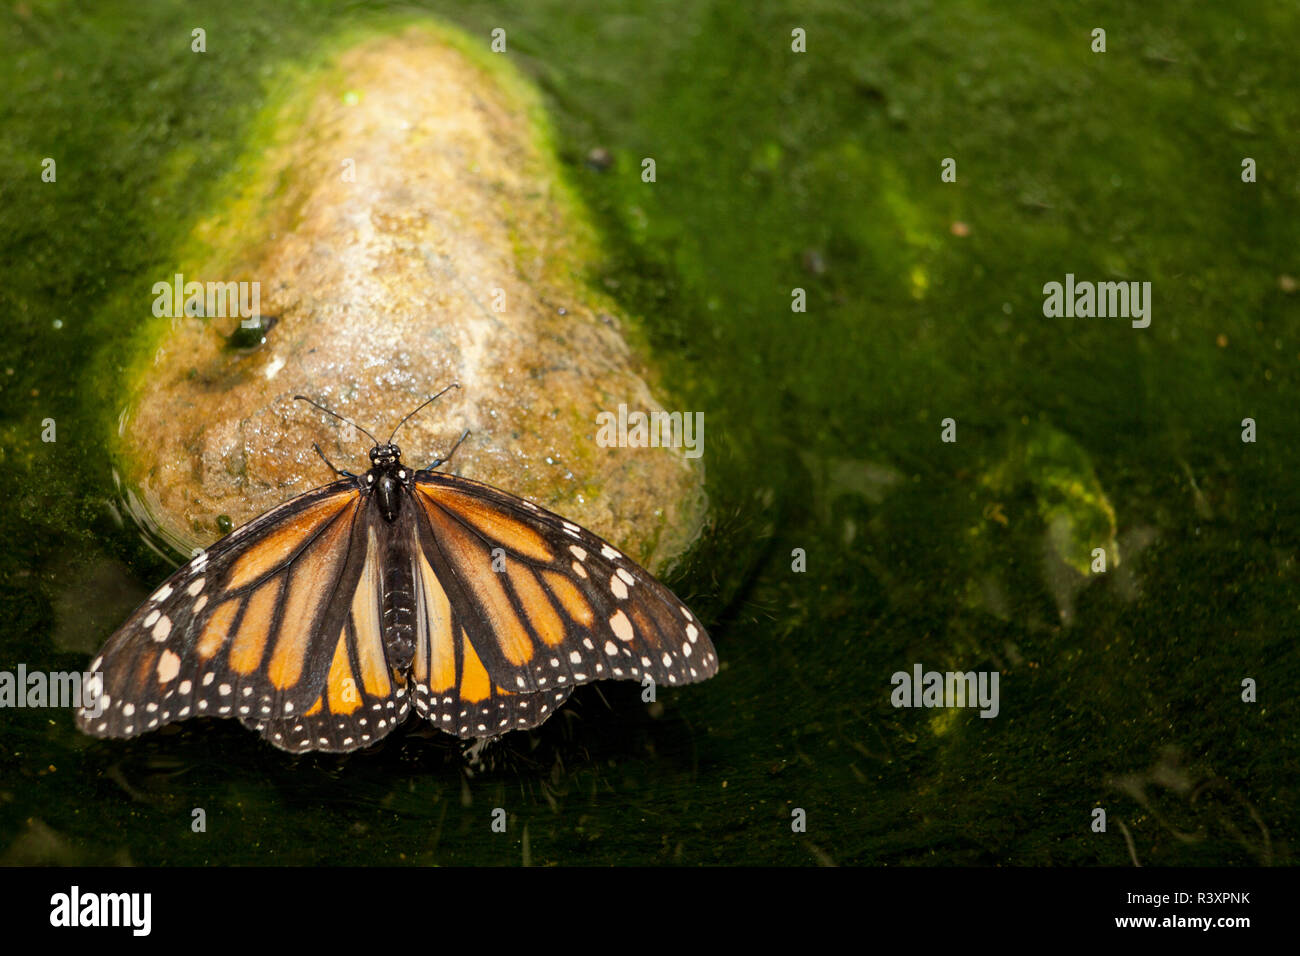 Monarch butterfly perched over green pond Stock Photo